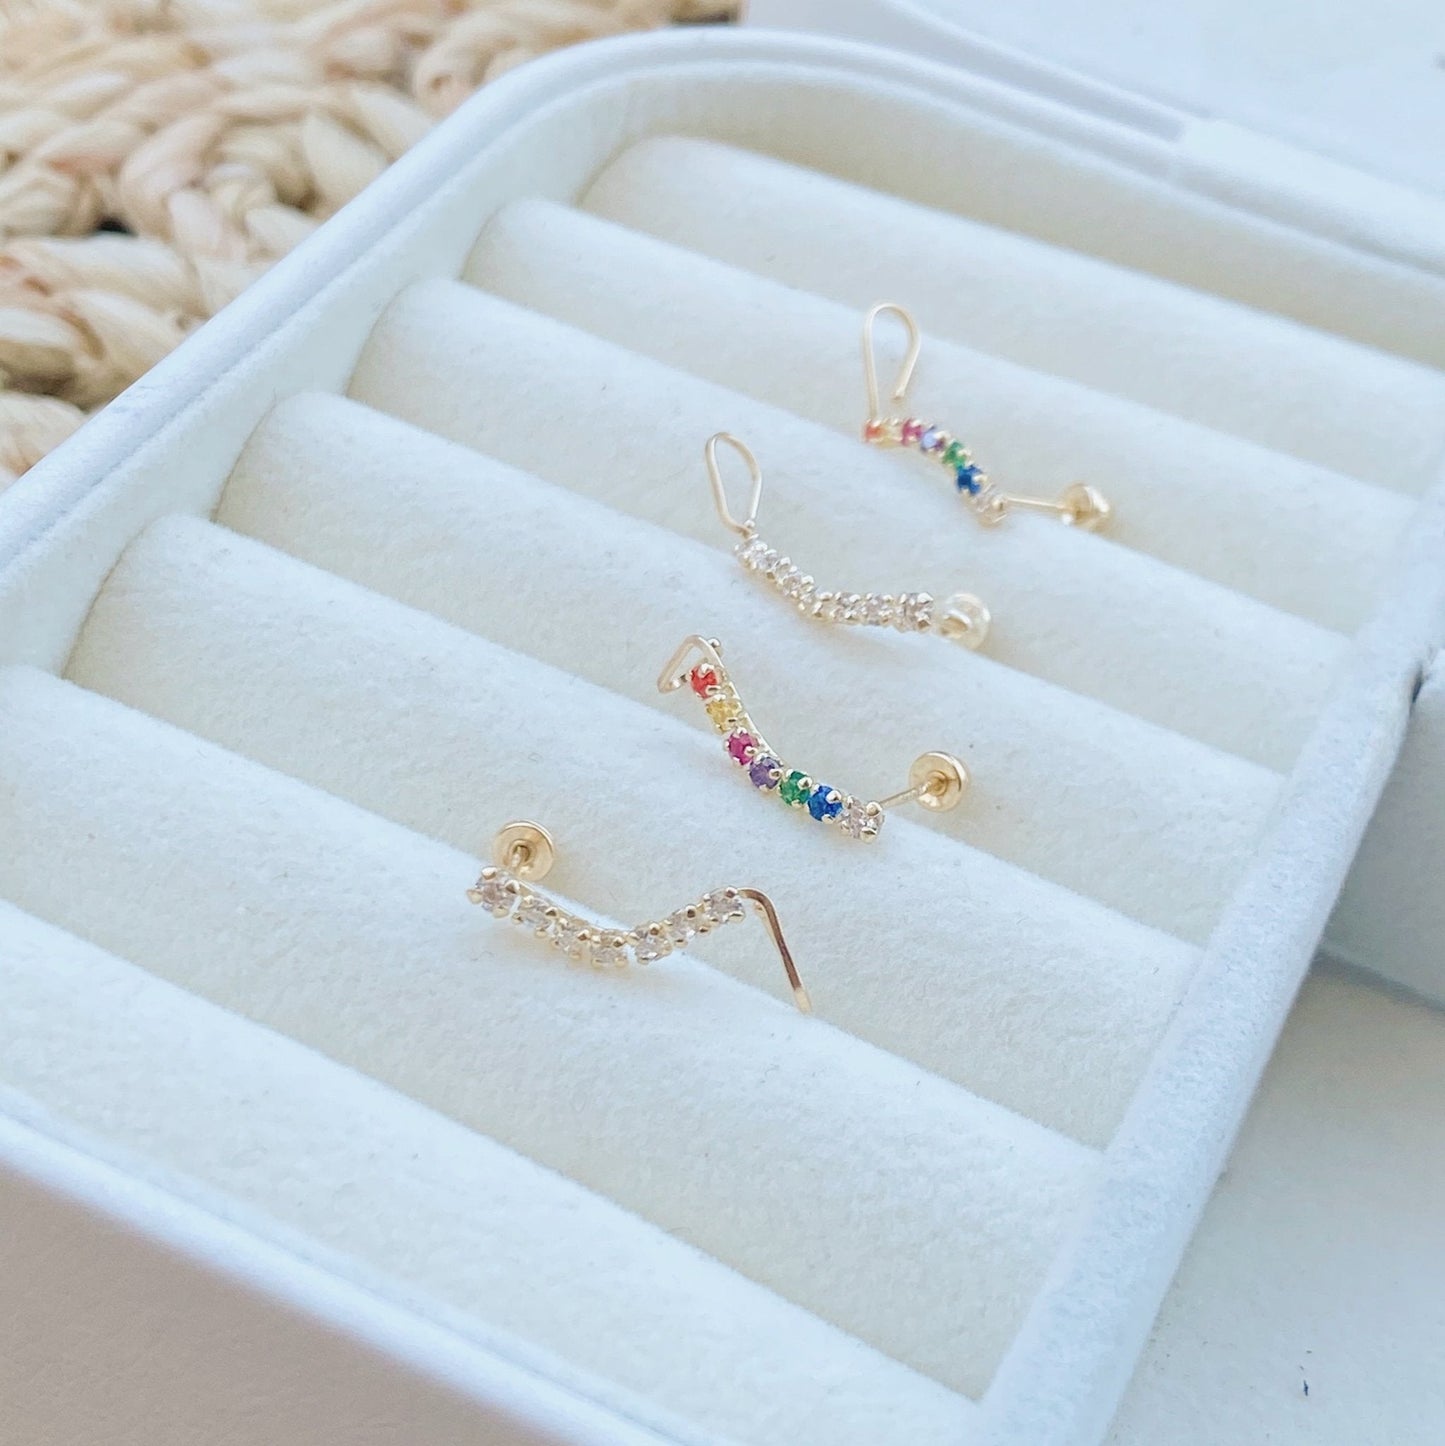 These gold Ear Climber Earrings are the perfect minimalist earring that you can wear every day.They're a simple way to add instant style and personality to any outfit or occasion. s